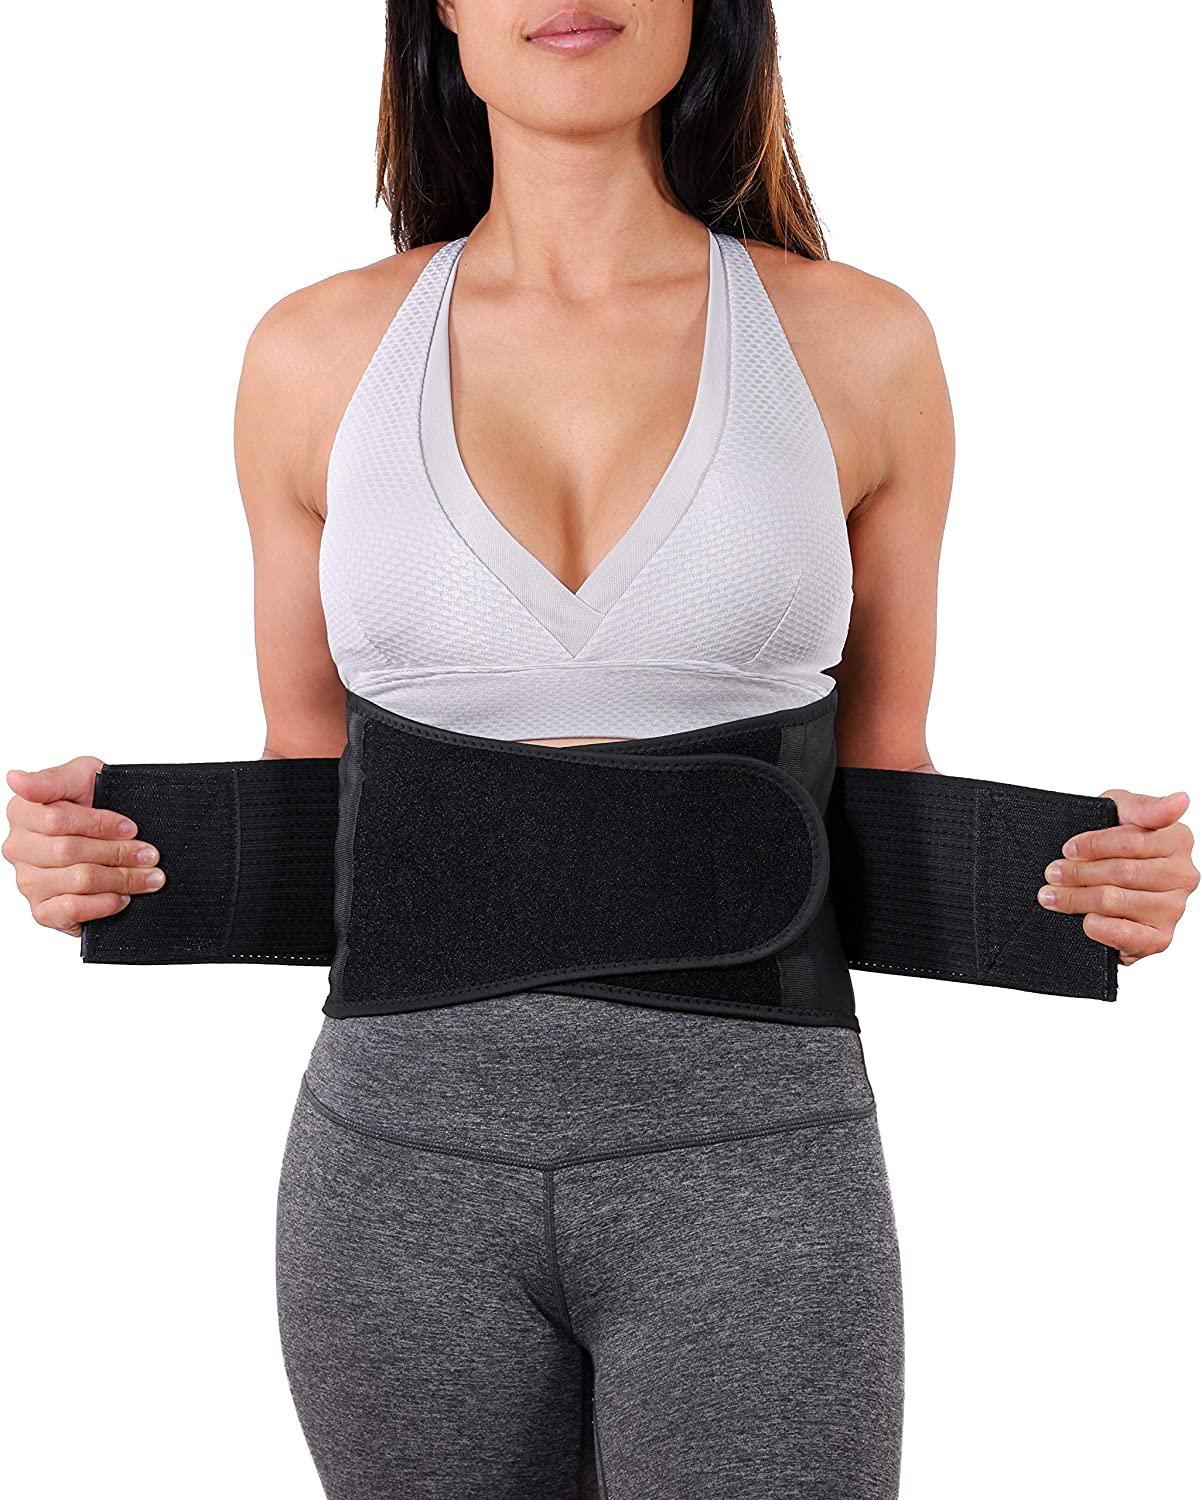  NeoHealth Workout Back Brace for Lower Back Support